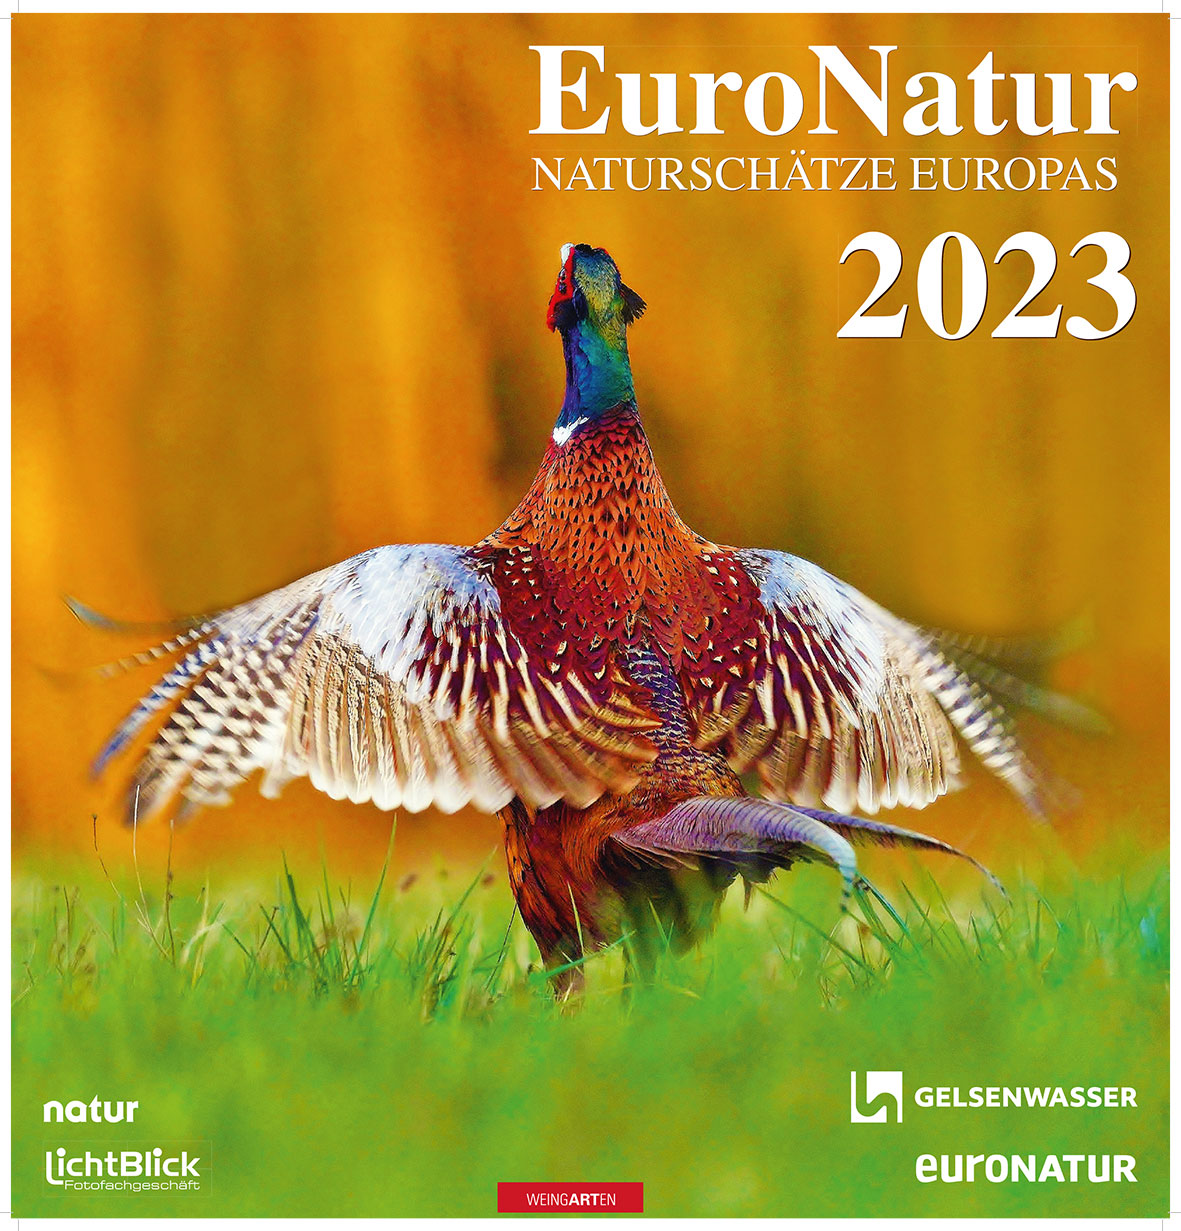 Common pheasant on the cover